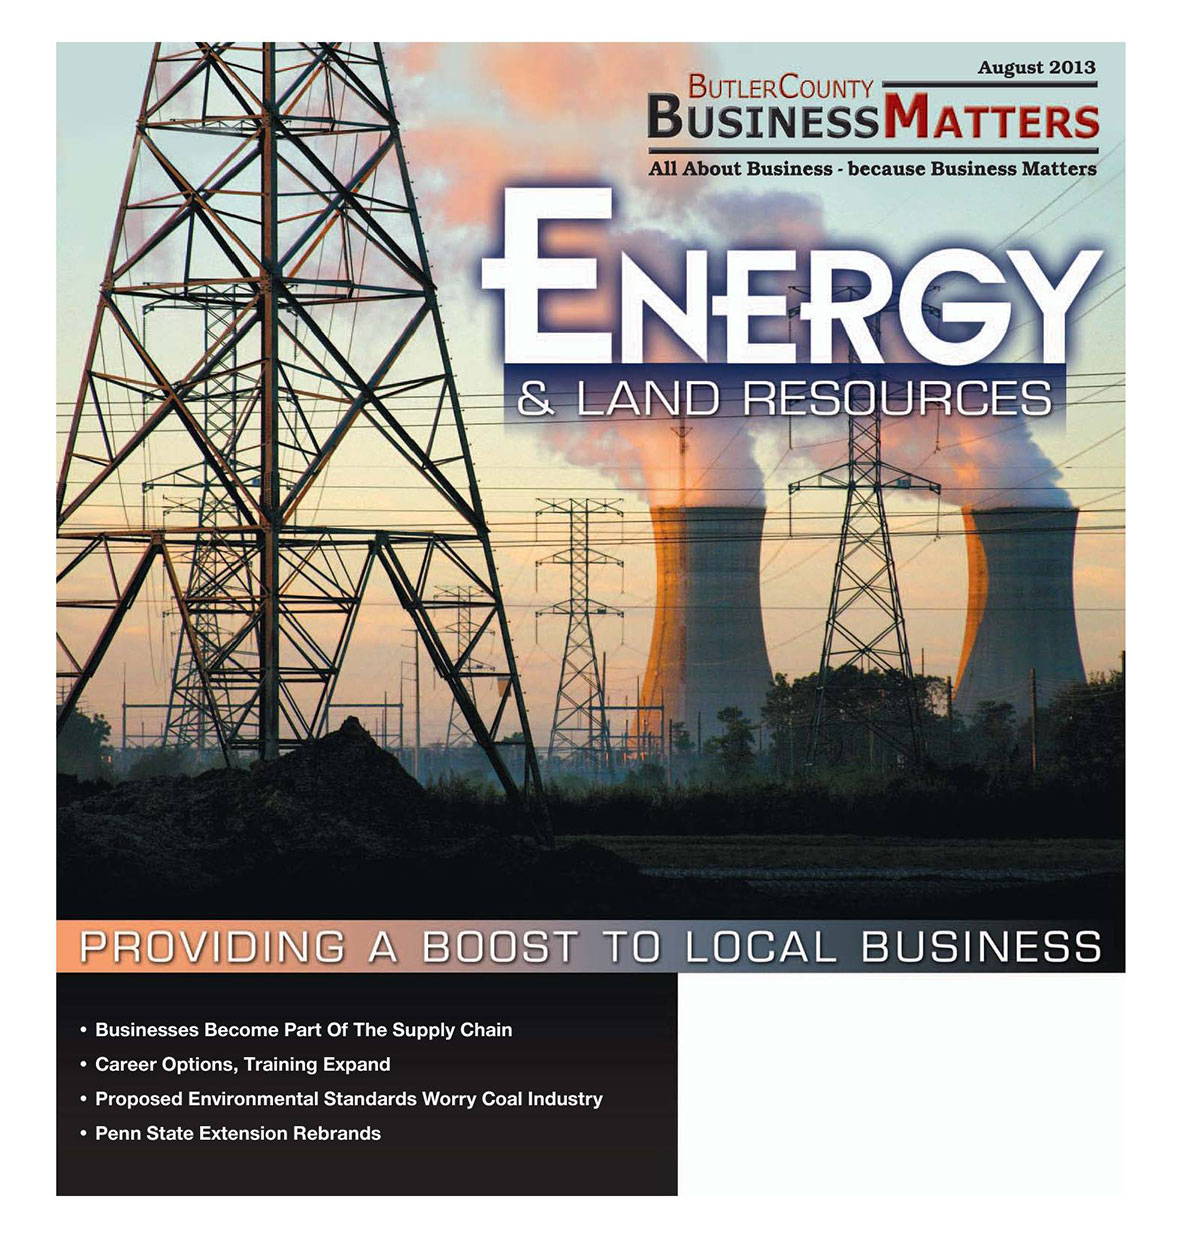 August 2013 - Energy & Land Resources - Providing A Boost To Local Business